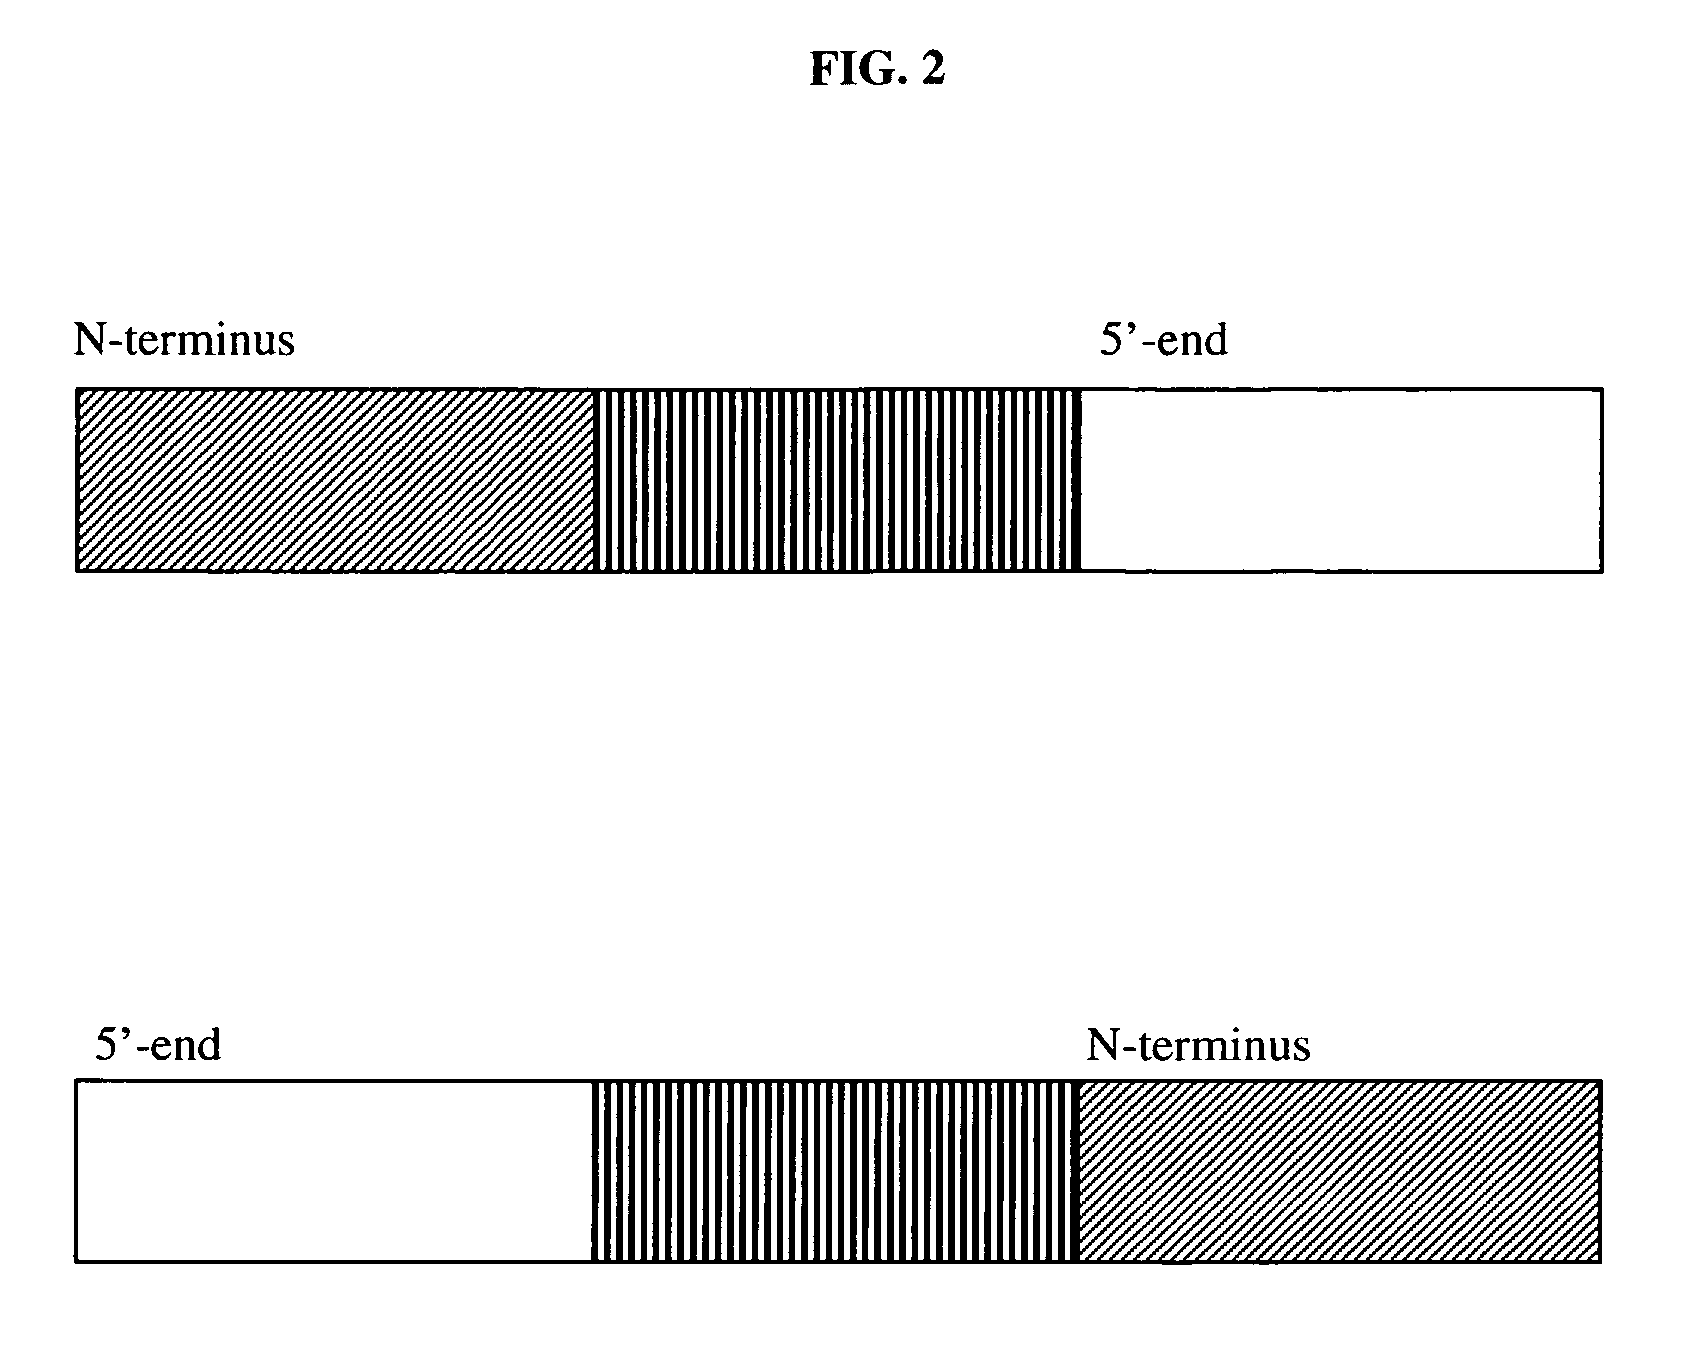 Therapeutic compositions and methods of using same